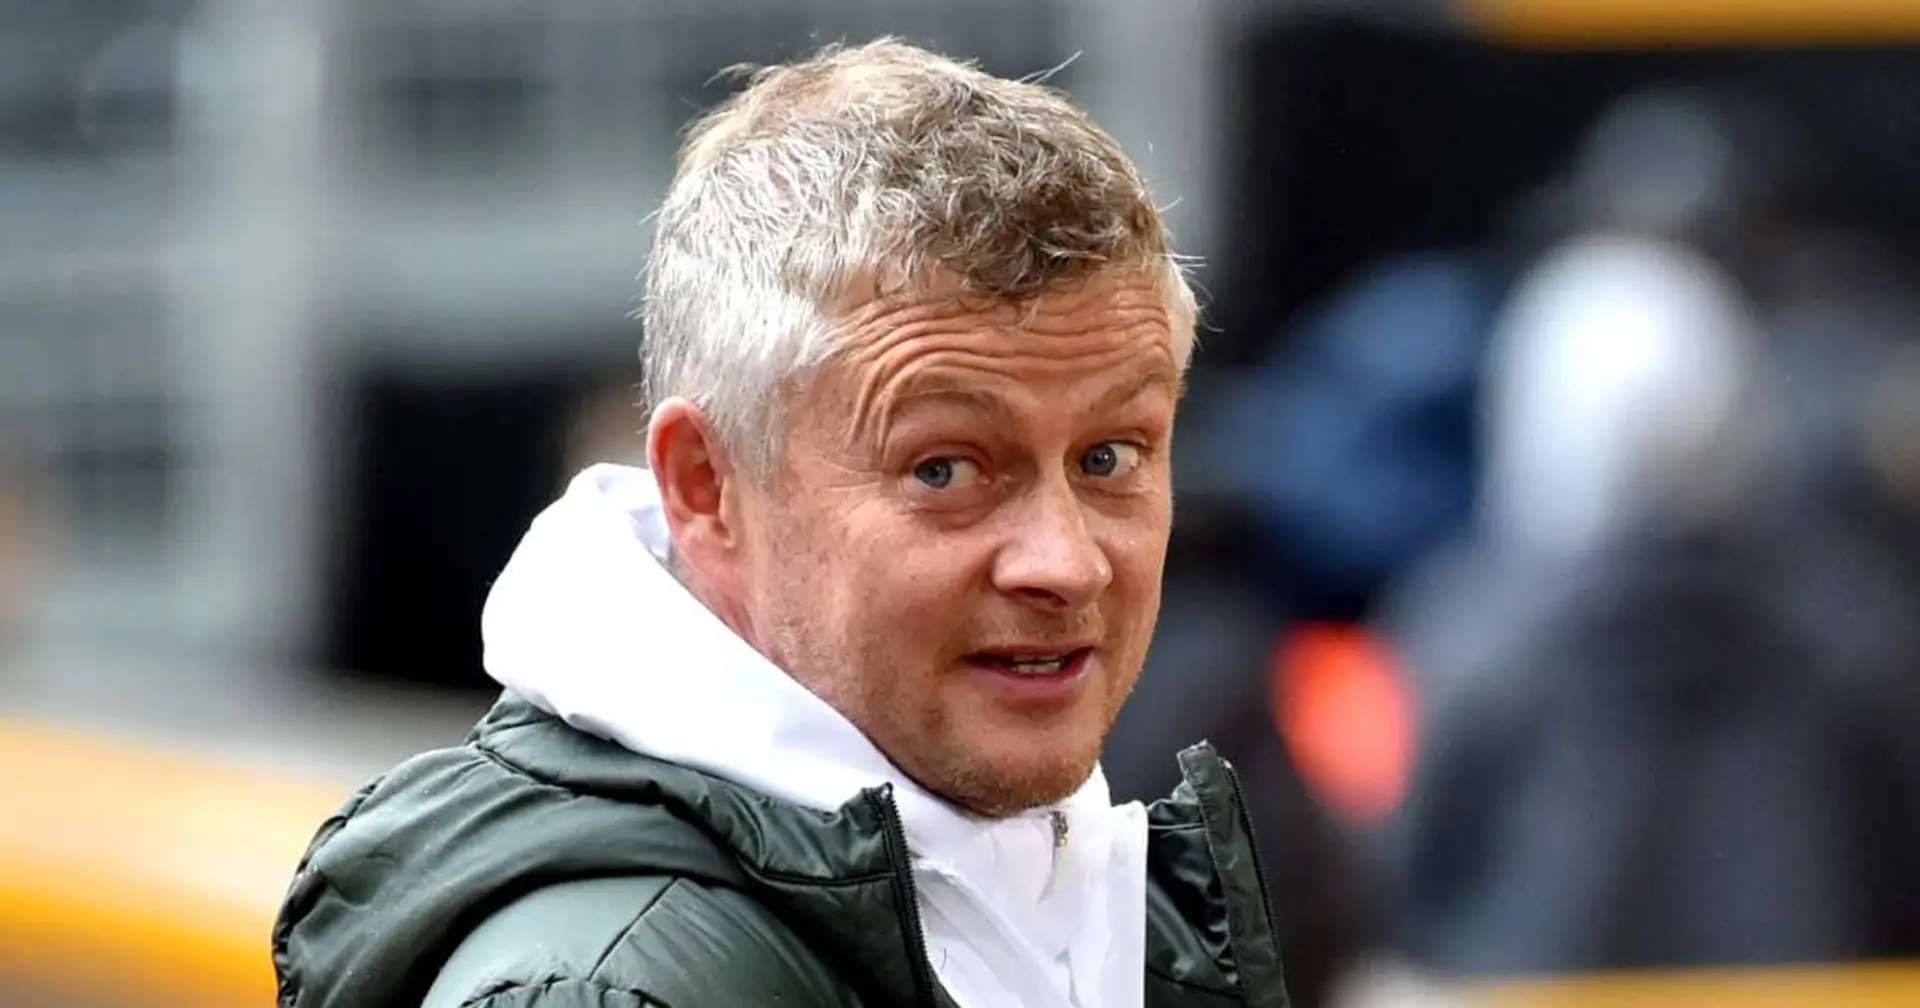 'He builds a squad rather than gets marquee signings': Man United fan highlights Ole's strongest side